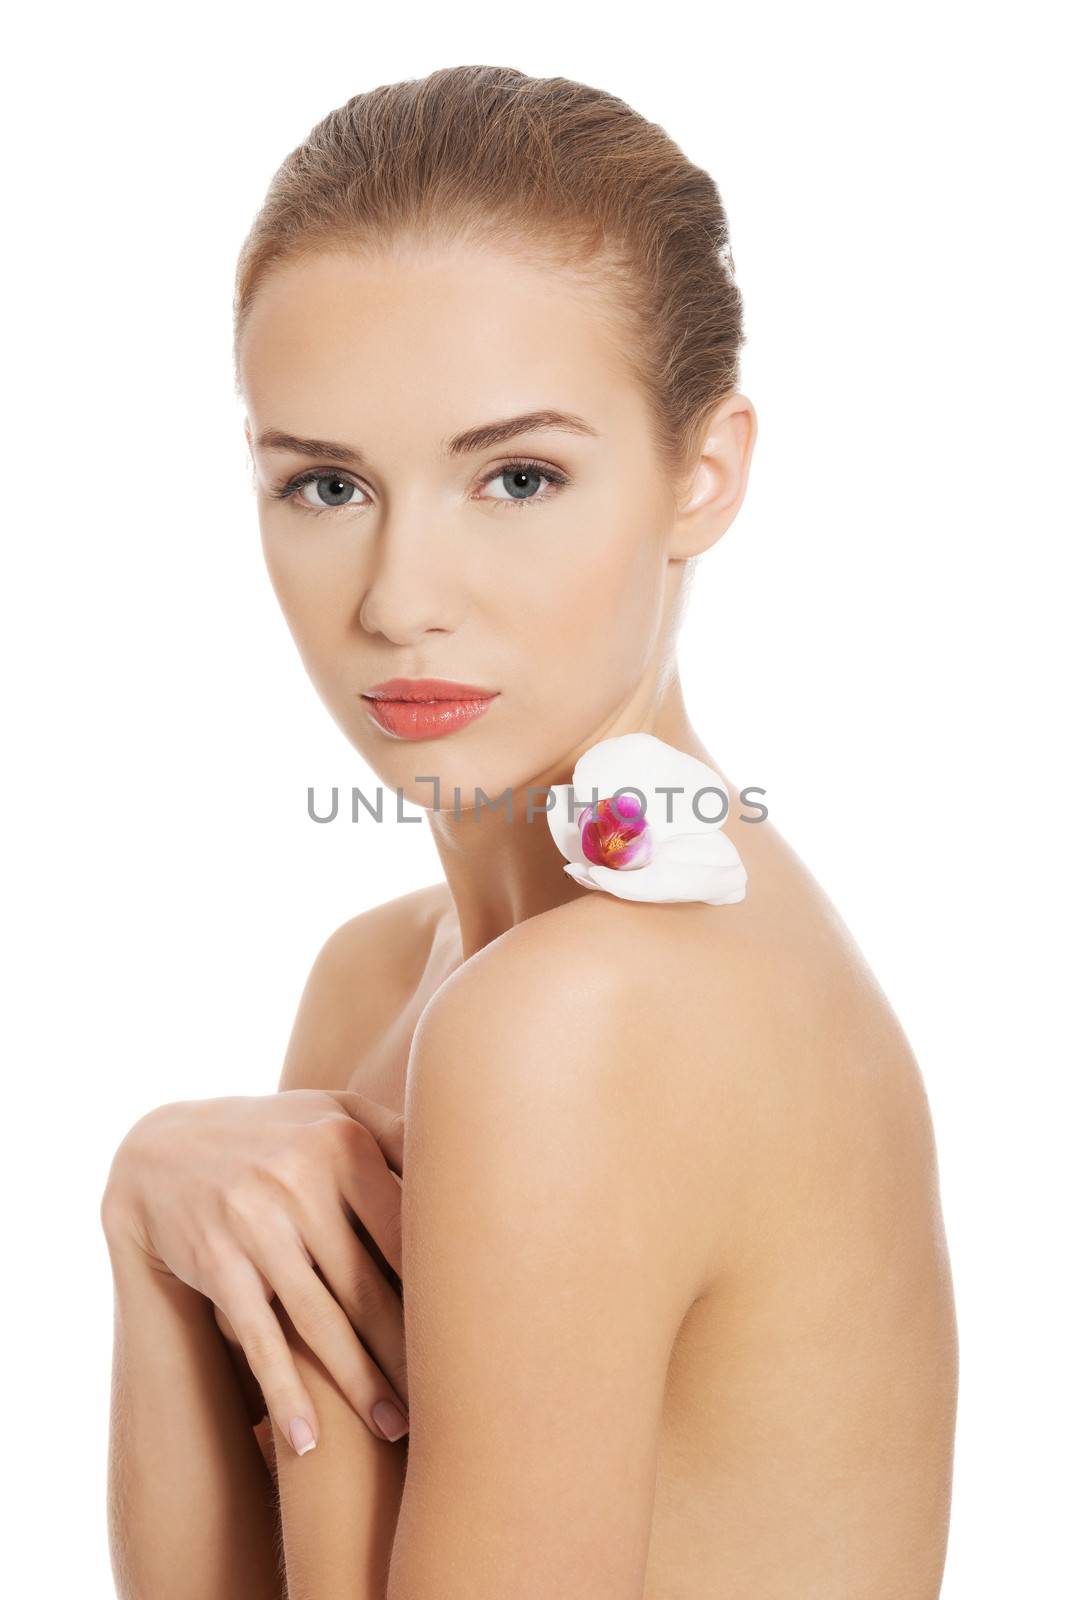 Nude naked woman having white flower on shoulders. Isolated on white.